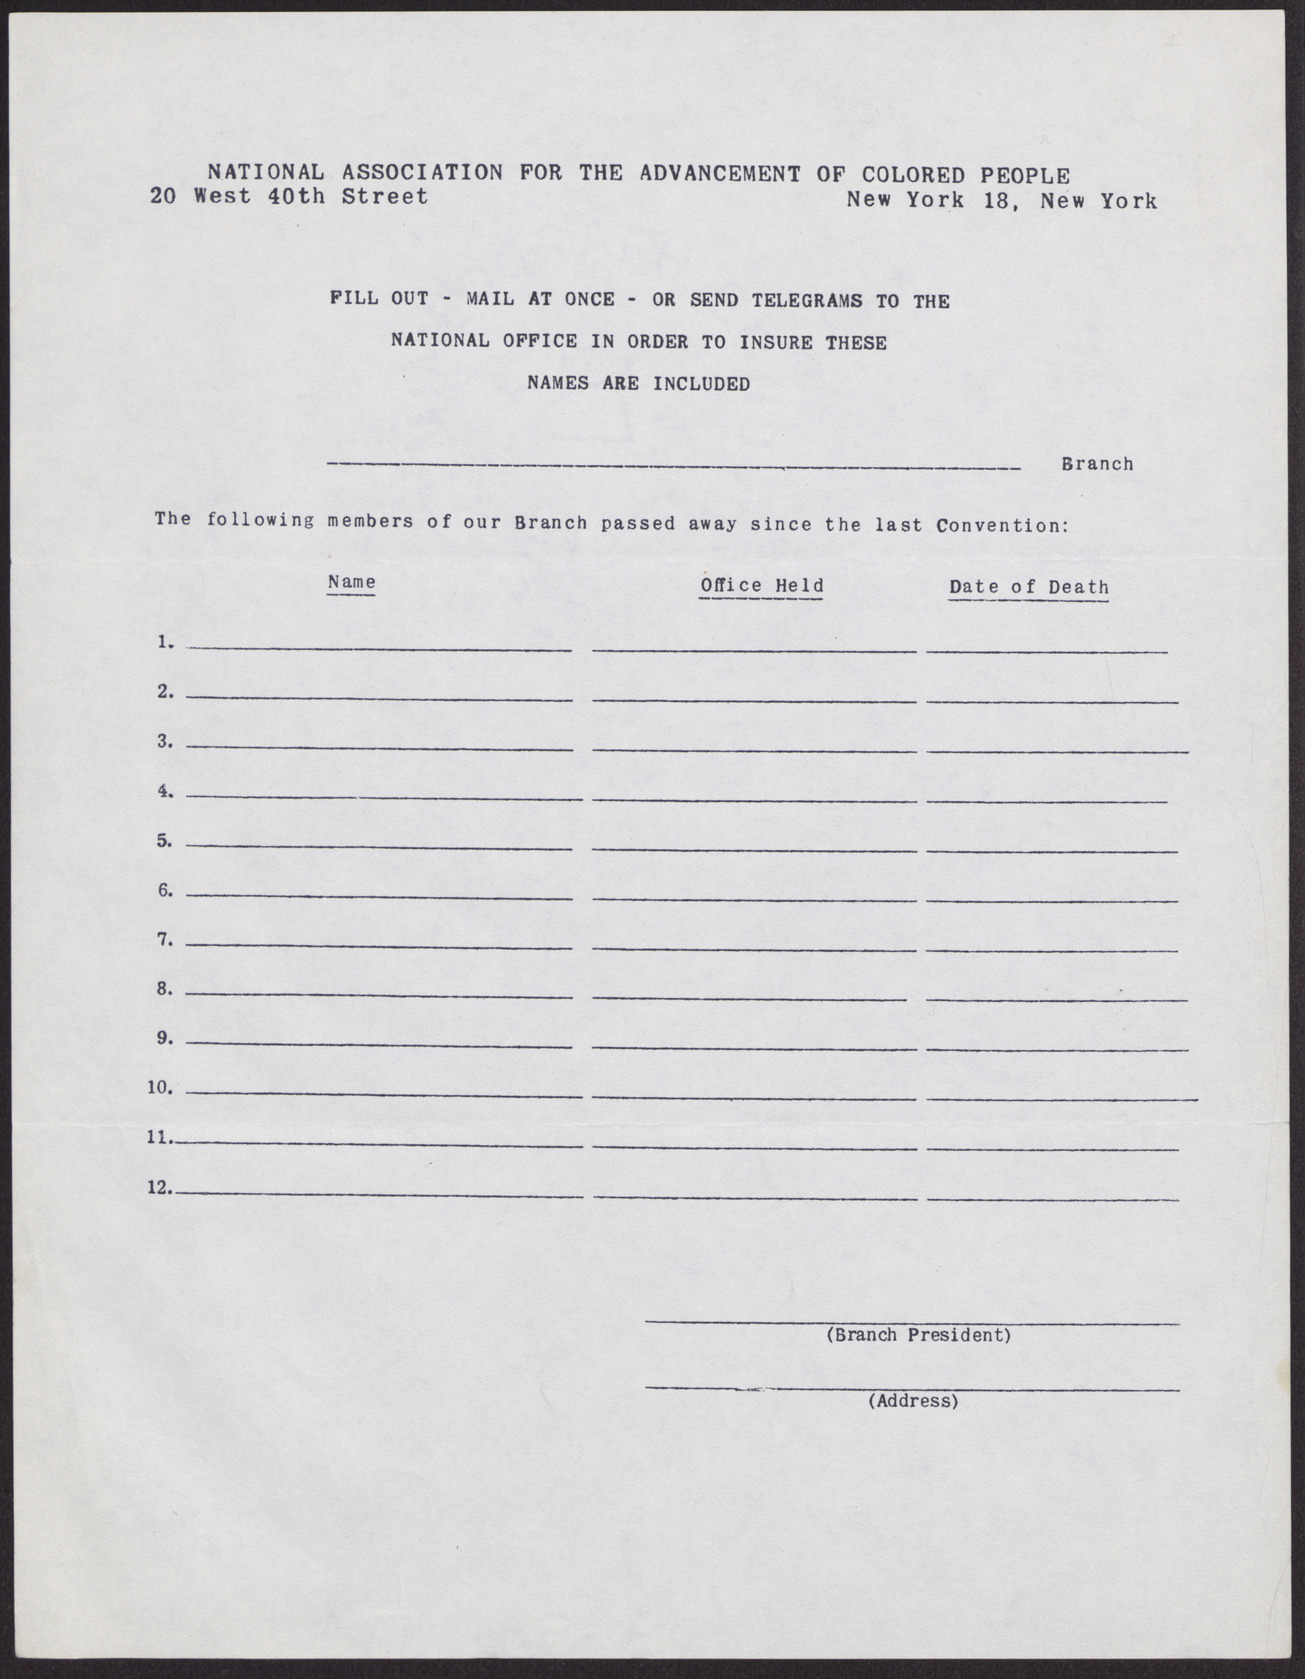 Blank form regarding the deaths of NAACP branch members, no date